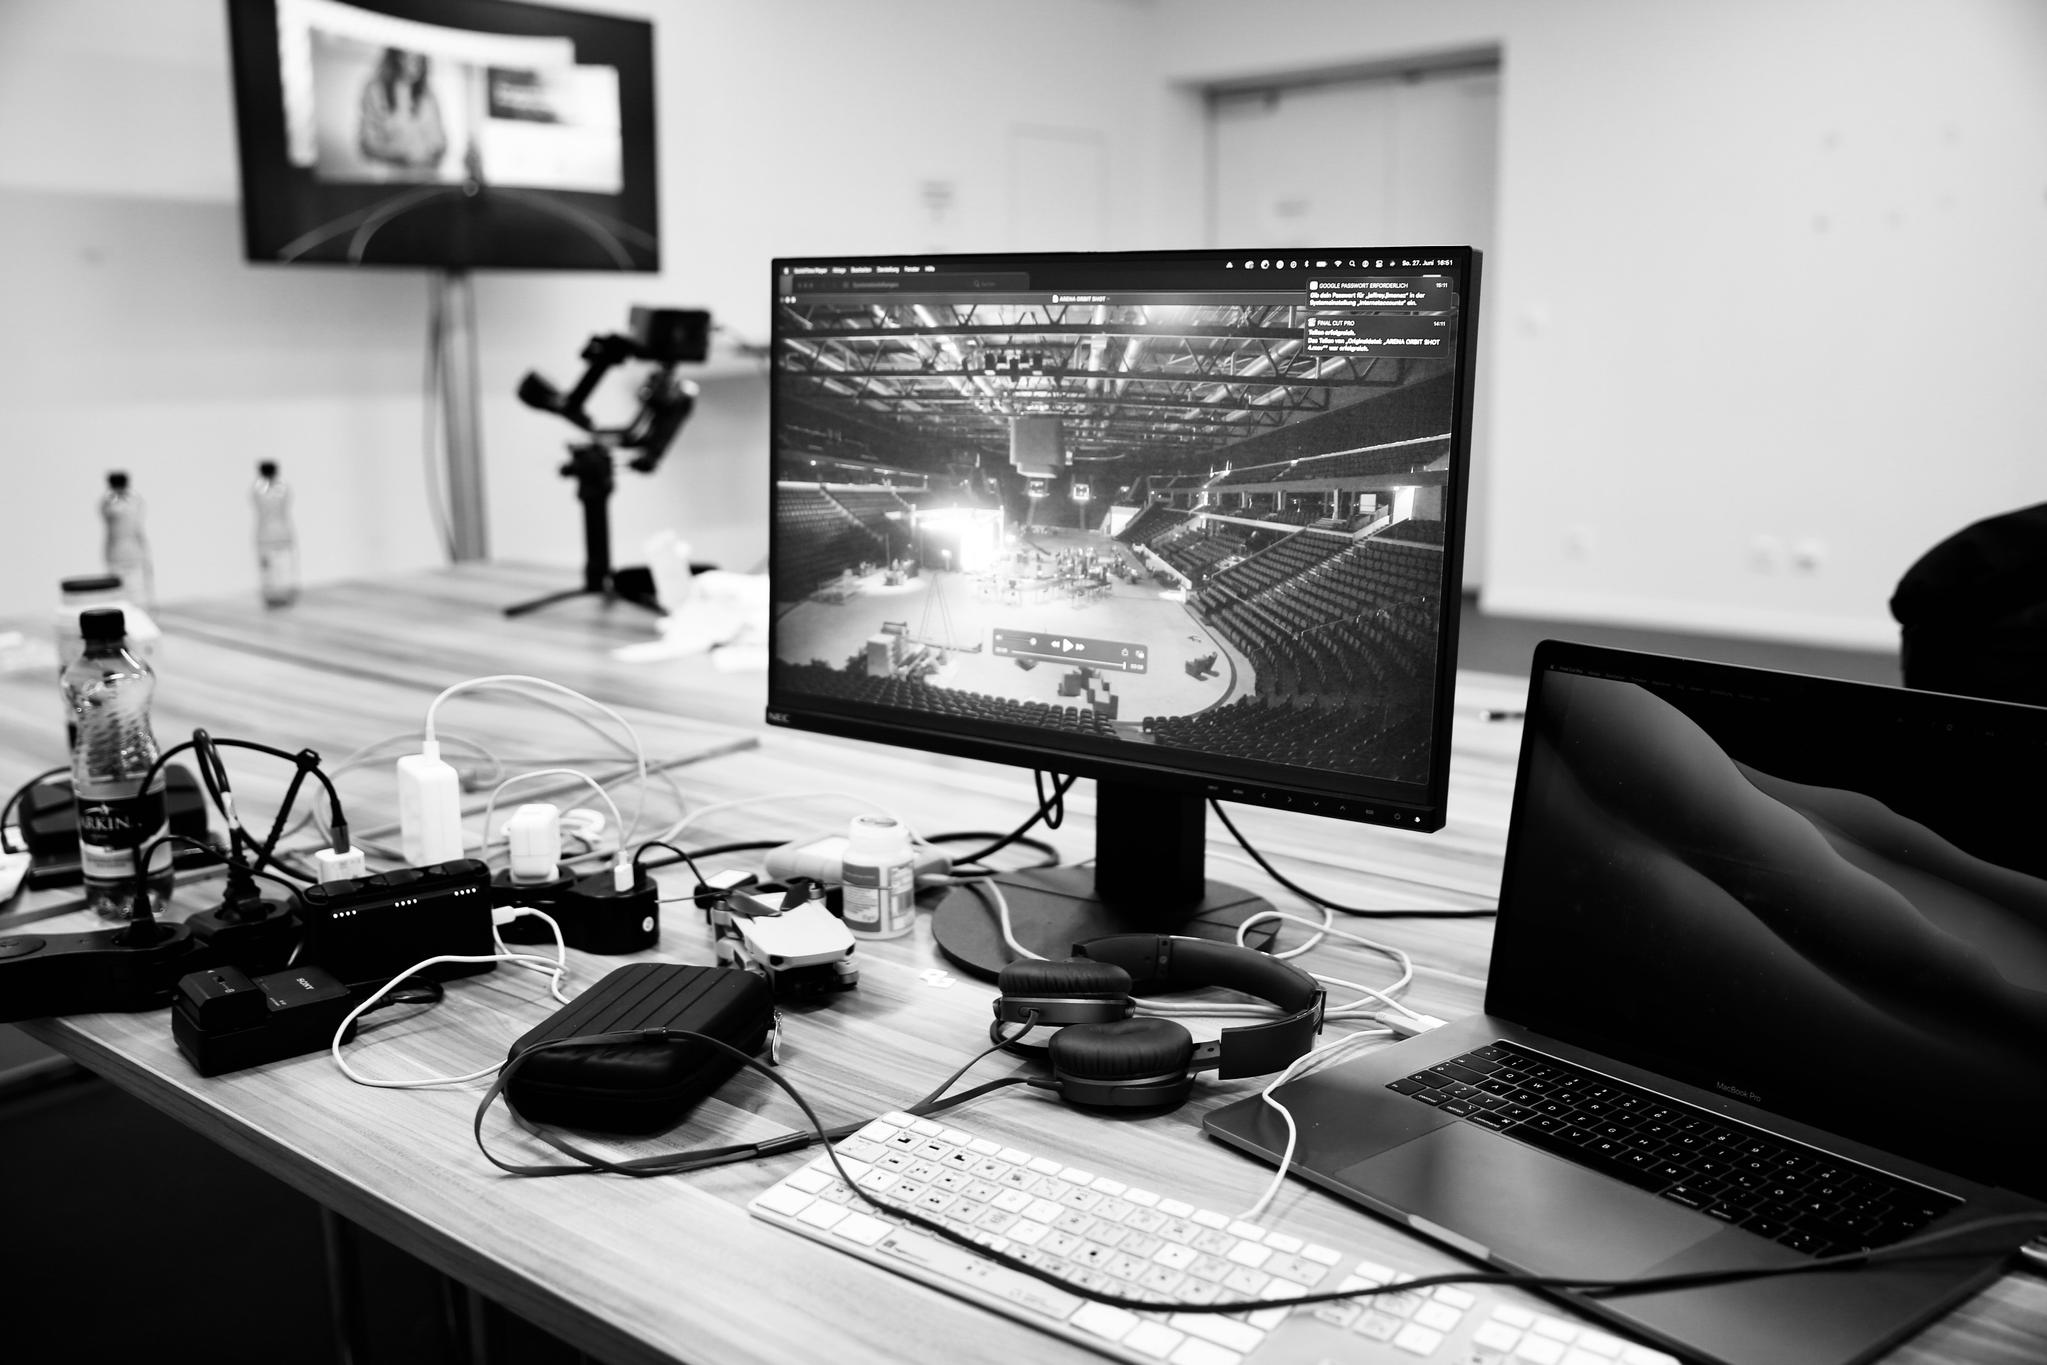 A black and white photo of 3 monitors: tv, computer, and laptop on a table in a nondescript white walled room. On the computer monitor there is footage of an empty stadium.